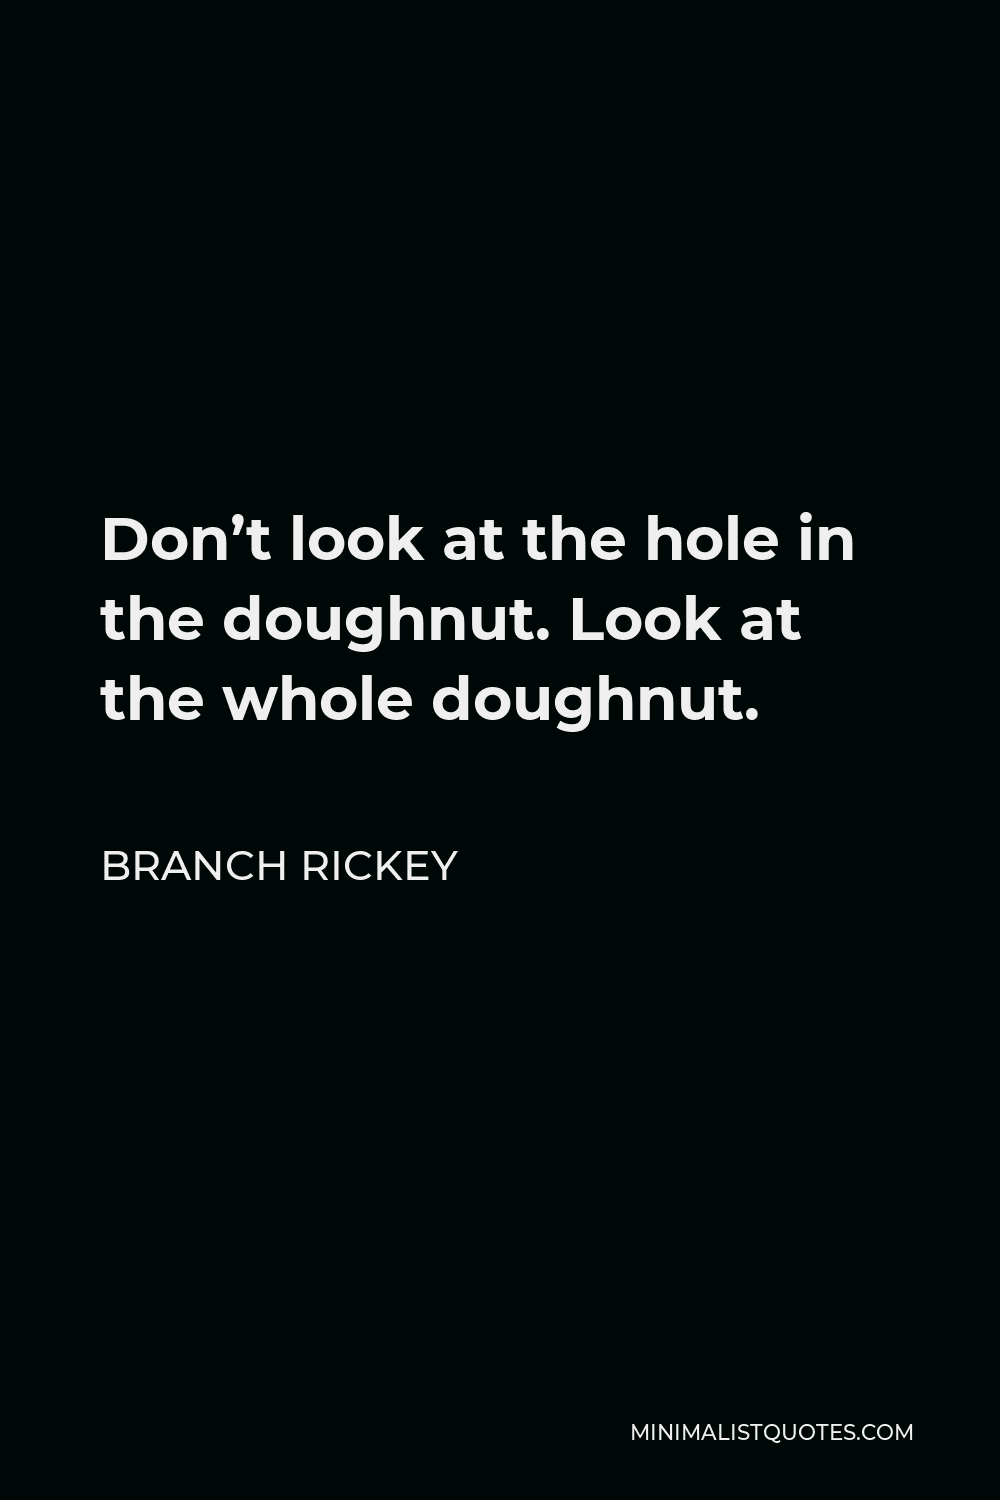 Branch Rickey Quote - Don’t look at the hole in the doughnut. Look at the whole doughnut.